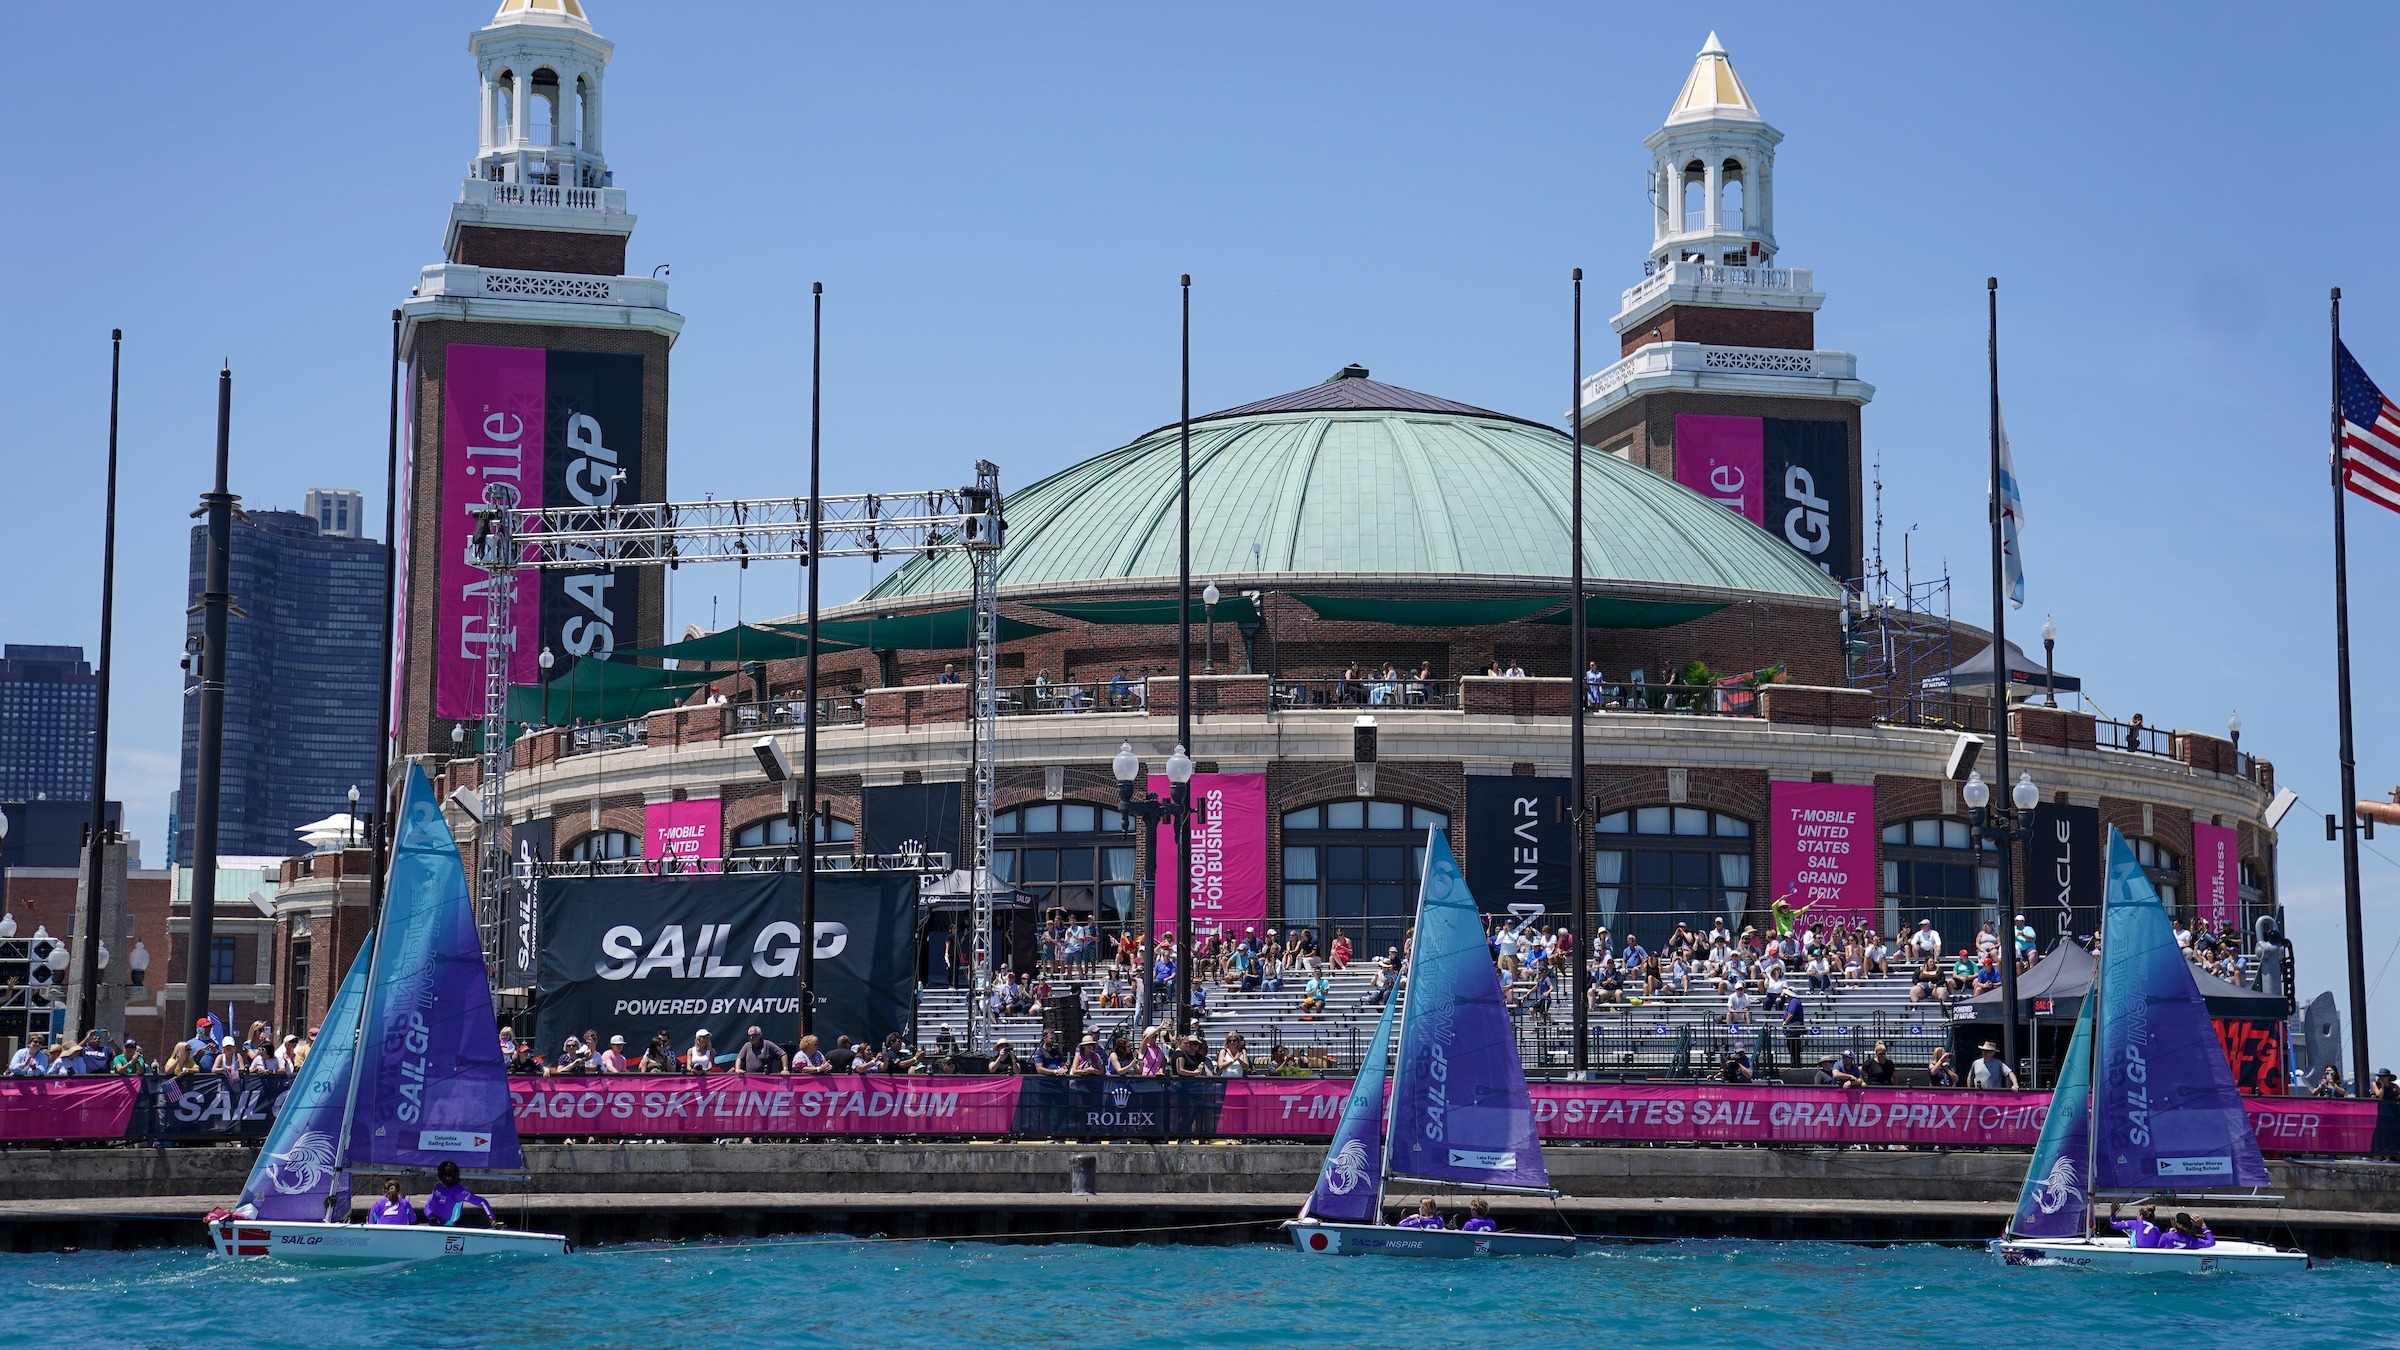 Season 3 // United States Sail Grand Prix Chicago // RS sailing by Navy Pier